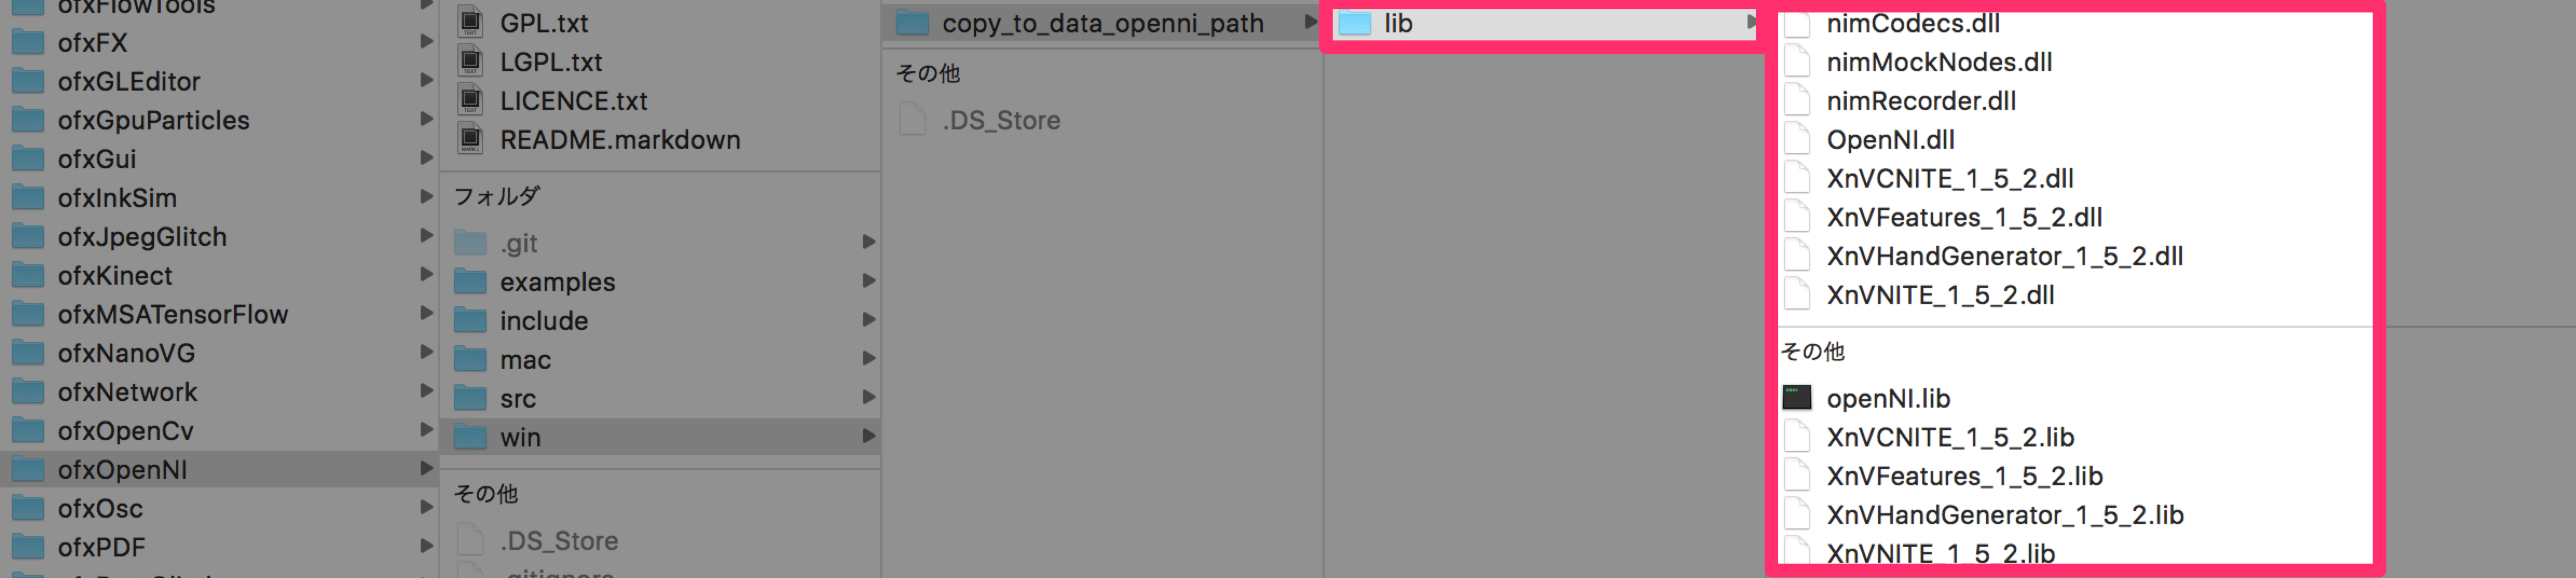 _Users_hirokinaganuma_Documents_hackenv_of_v0.9.2_osx_release_addons_ofxOpenNI_win_copy_to_data_openni_path_lib.png